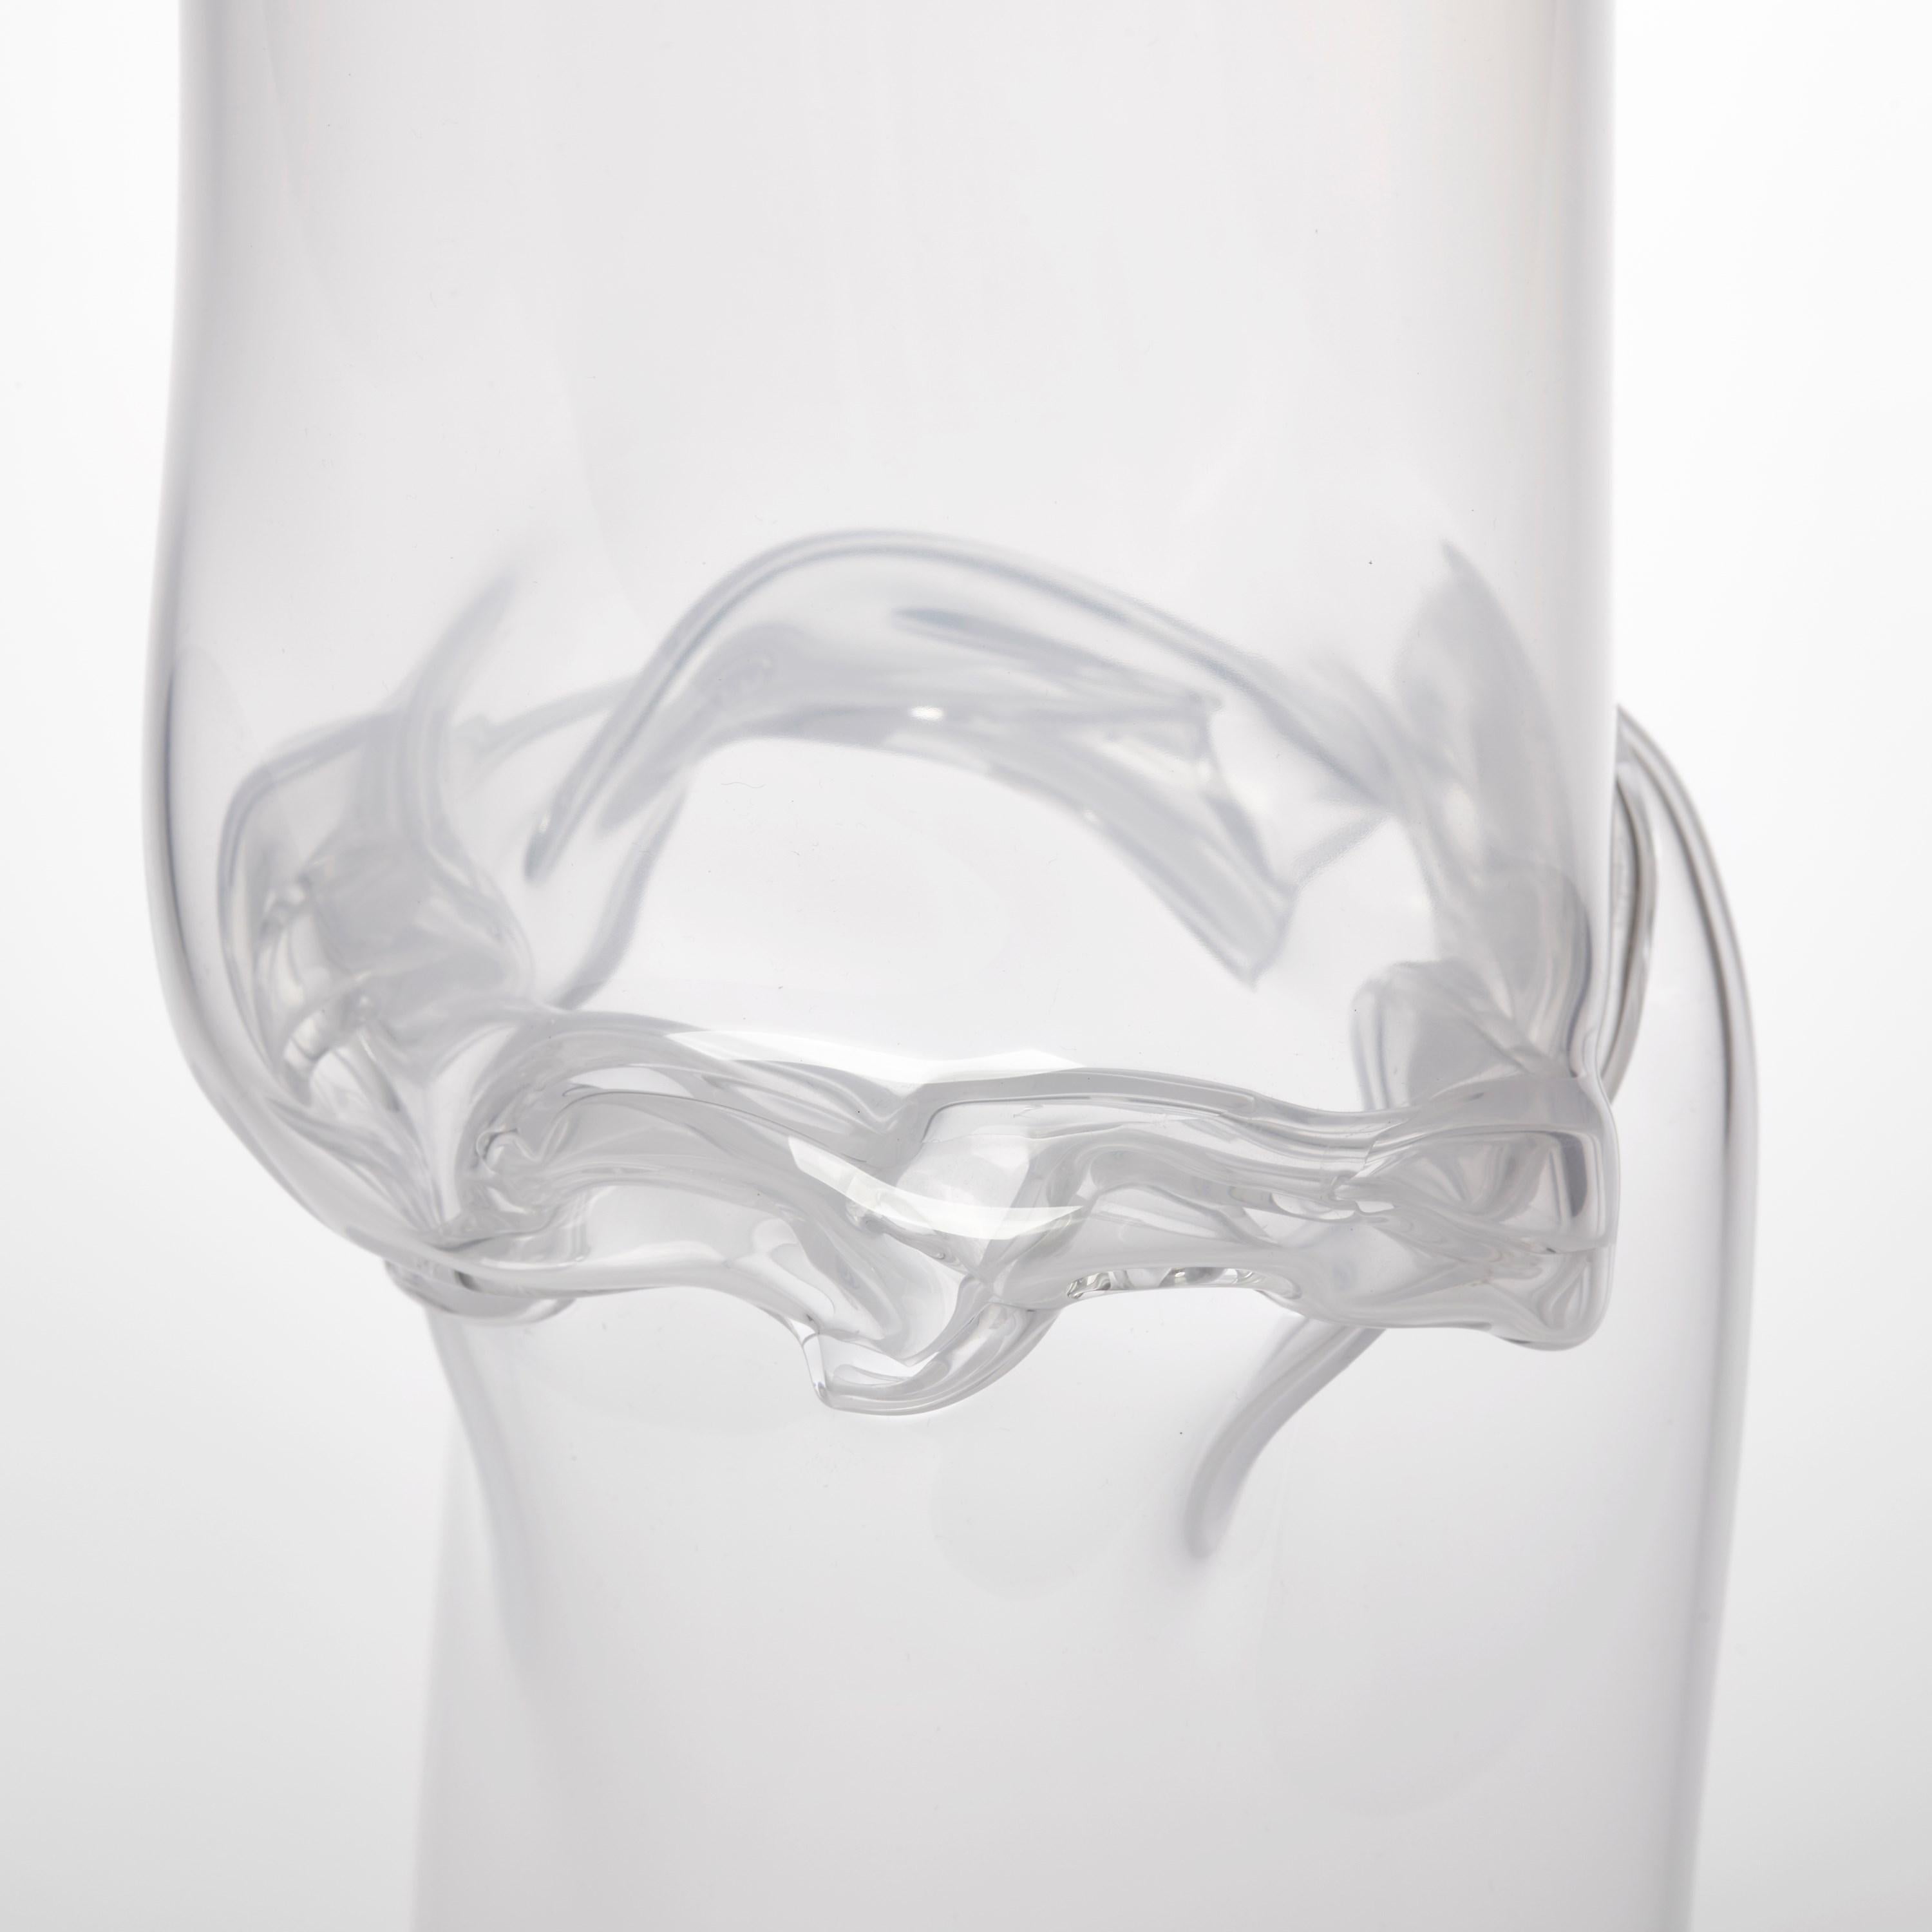 Organic Modern Torsion in Opal White 22/02, clear & white glass sculptural vessel by Emma Baker For Sale